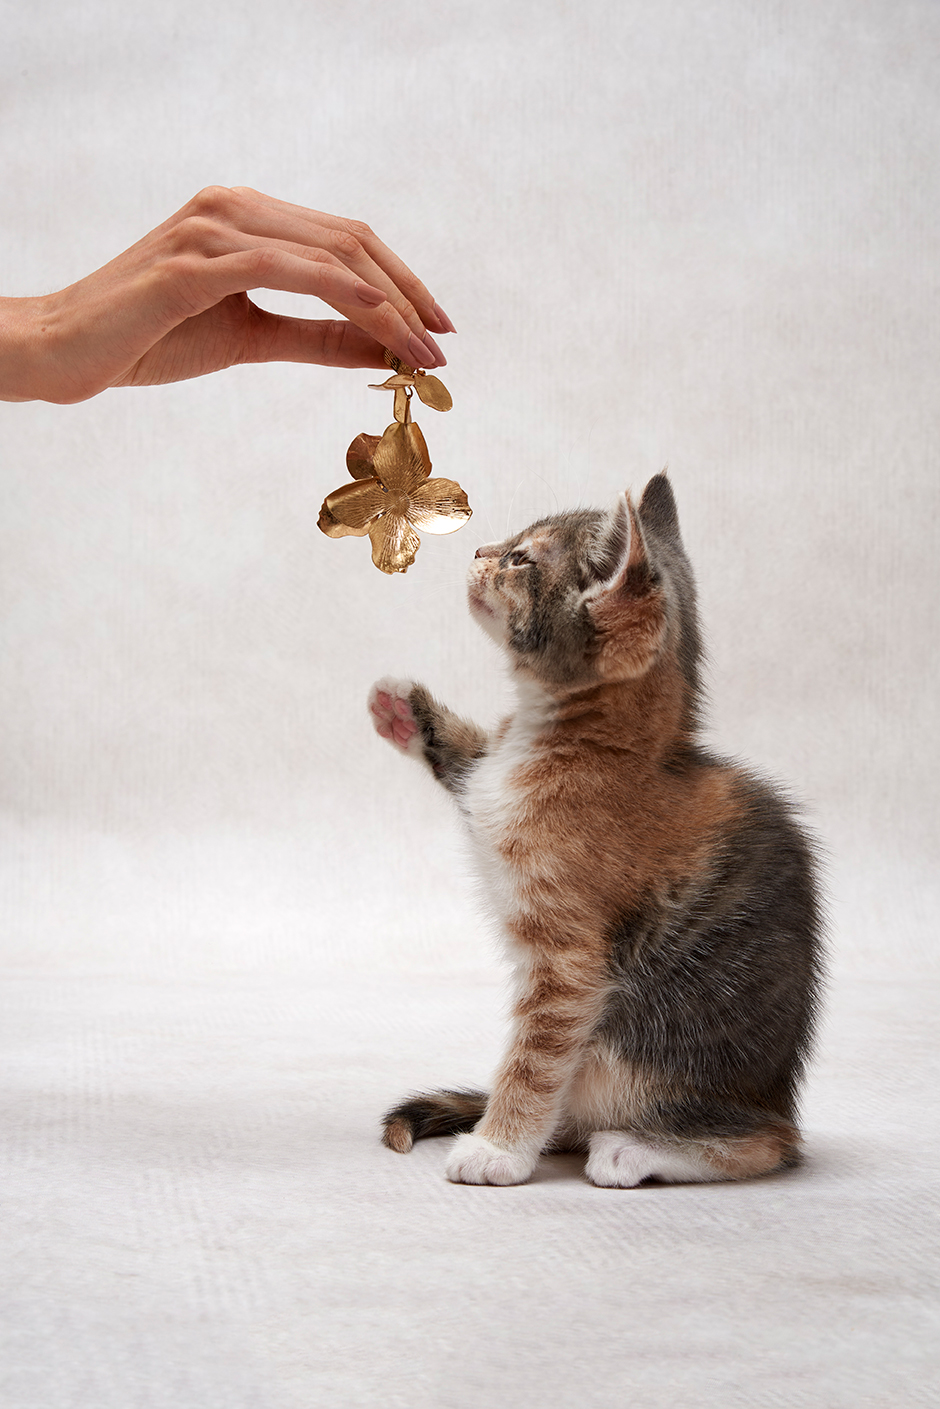 Kitten on a textured background trying to catch an earring out of a models hand.